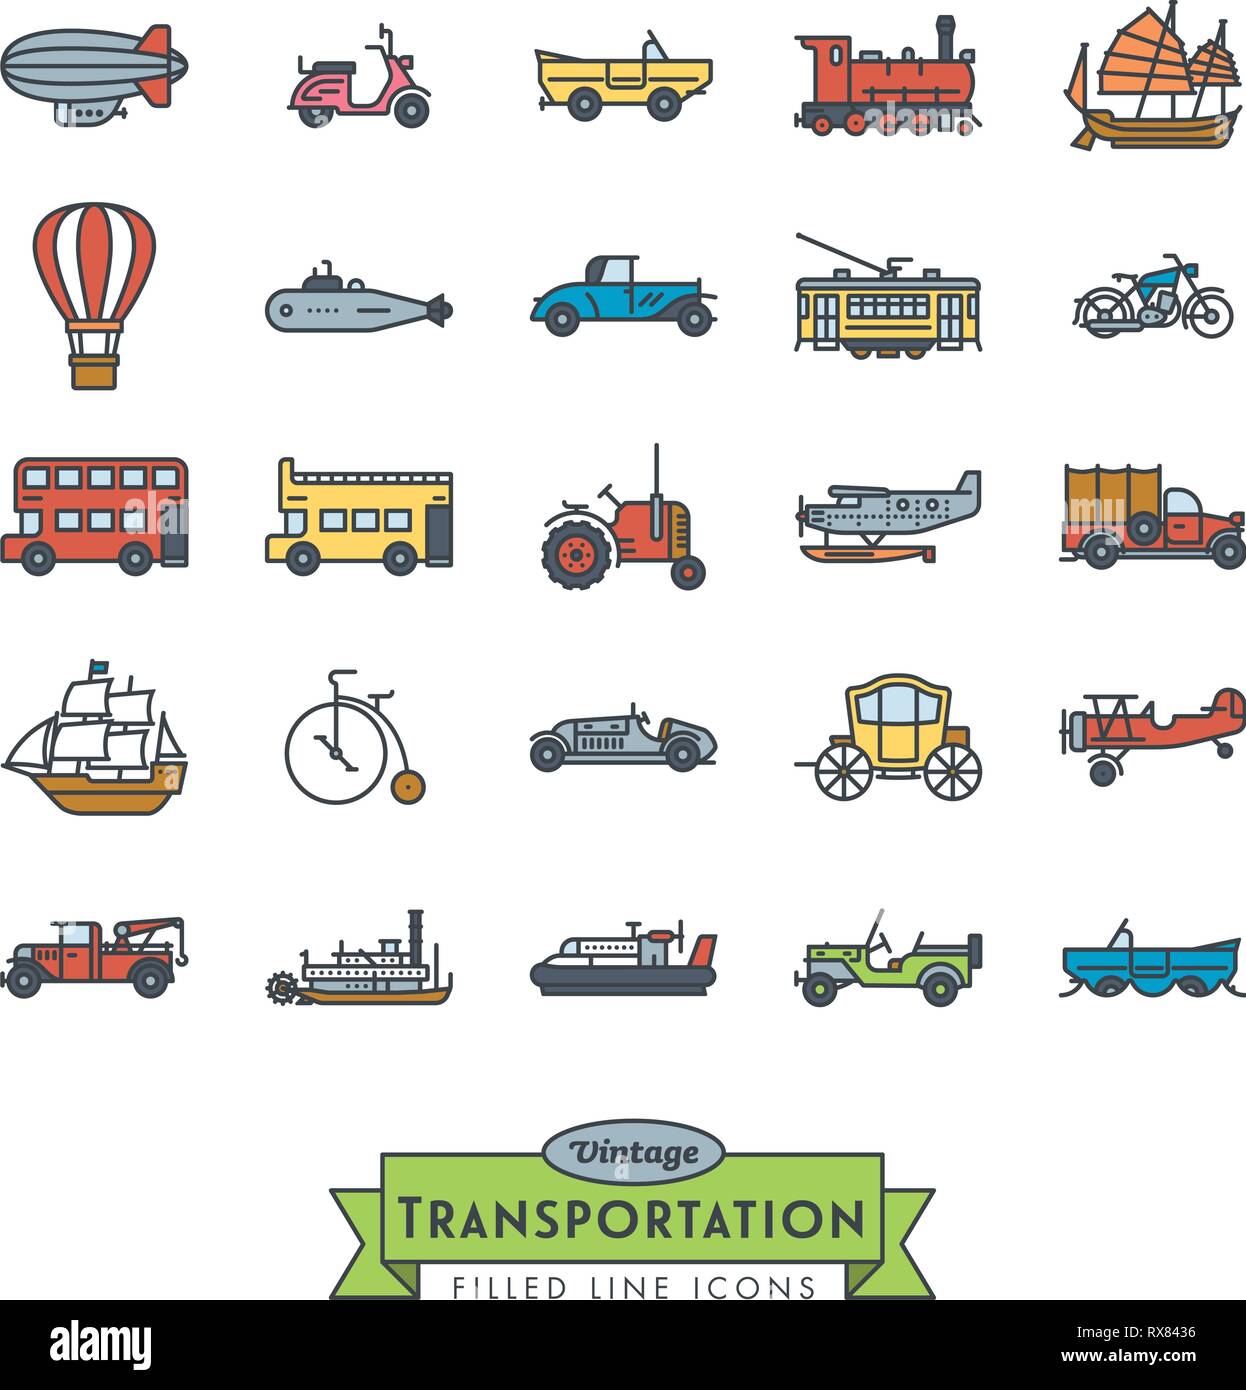 Collection of vintage transportation vehicles vector icons. Filled Outline Style. Stock Vector